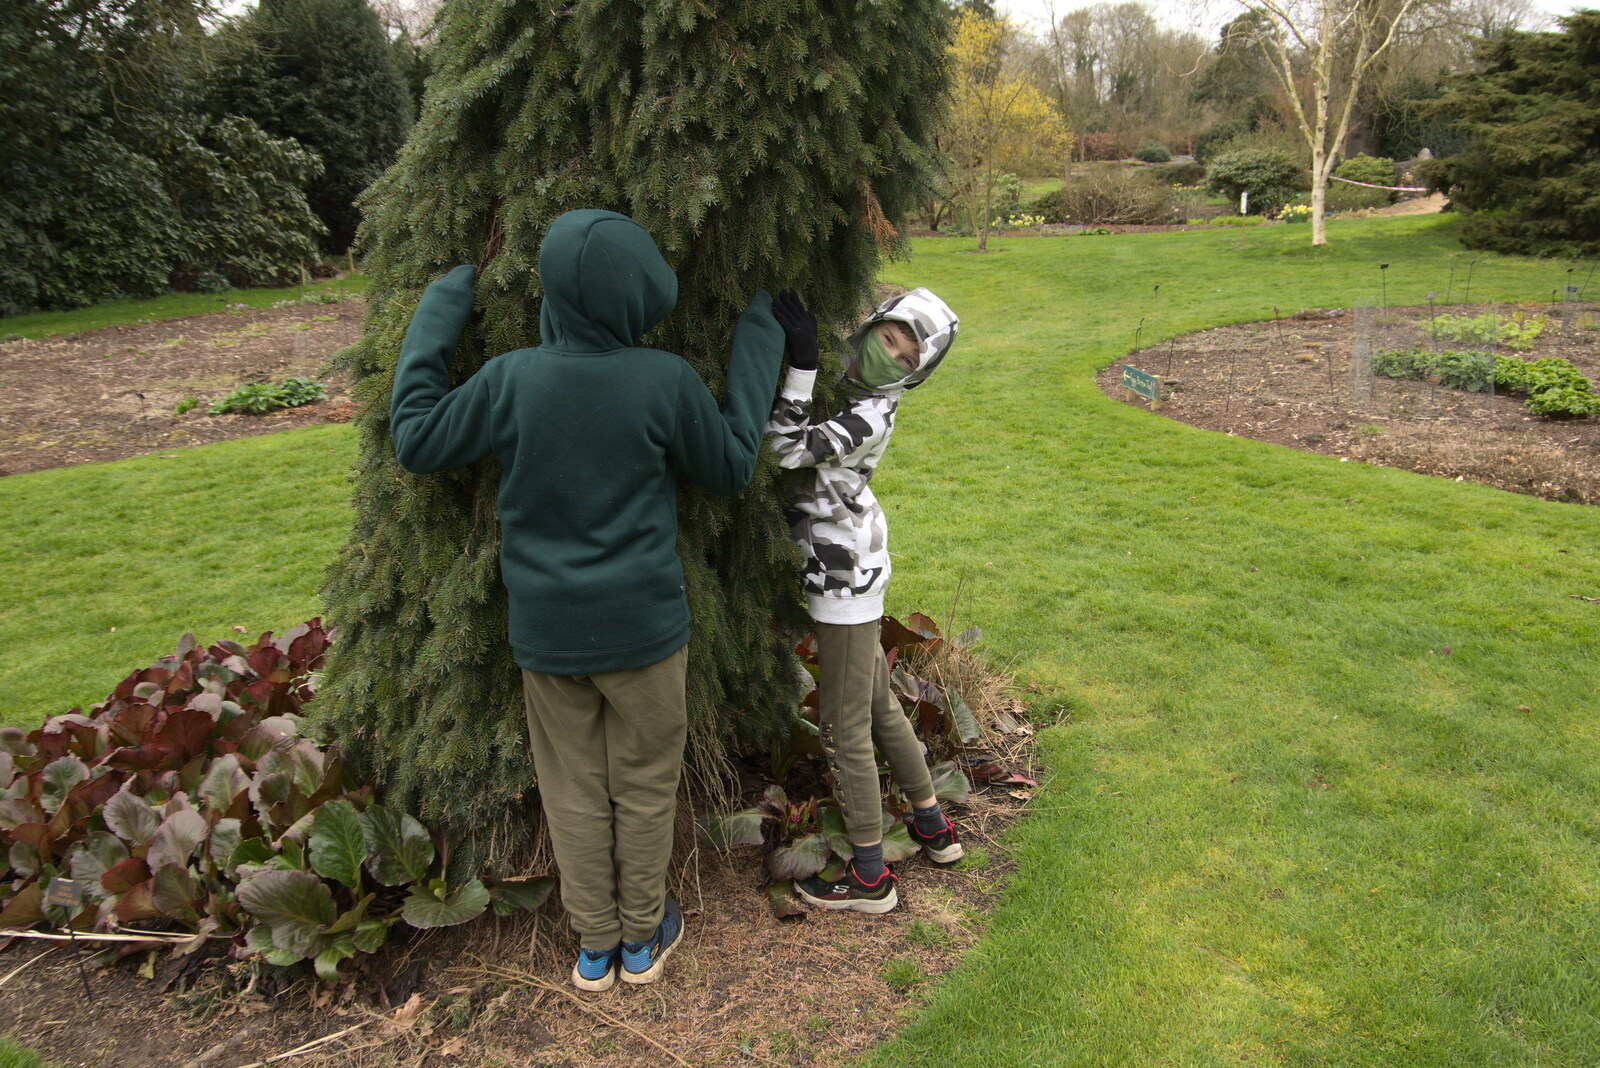 Fred and Harry hug a tree from A Return to Bressingham Steam and Gardens, Bressingham, Norfolk - 28th March 2021